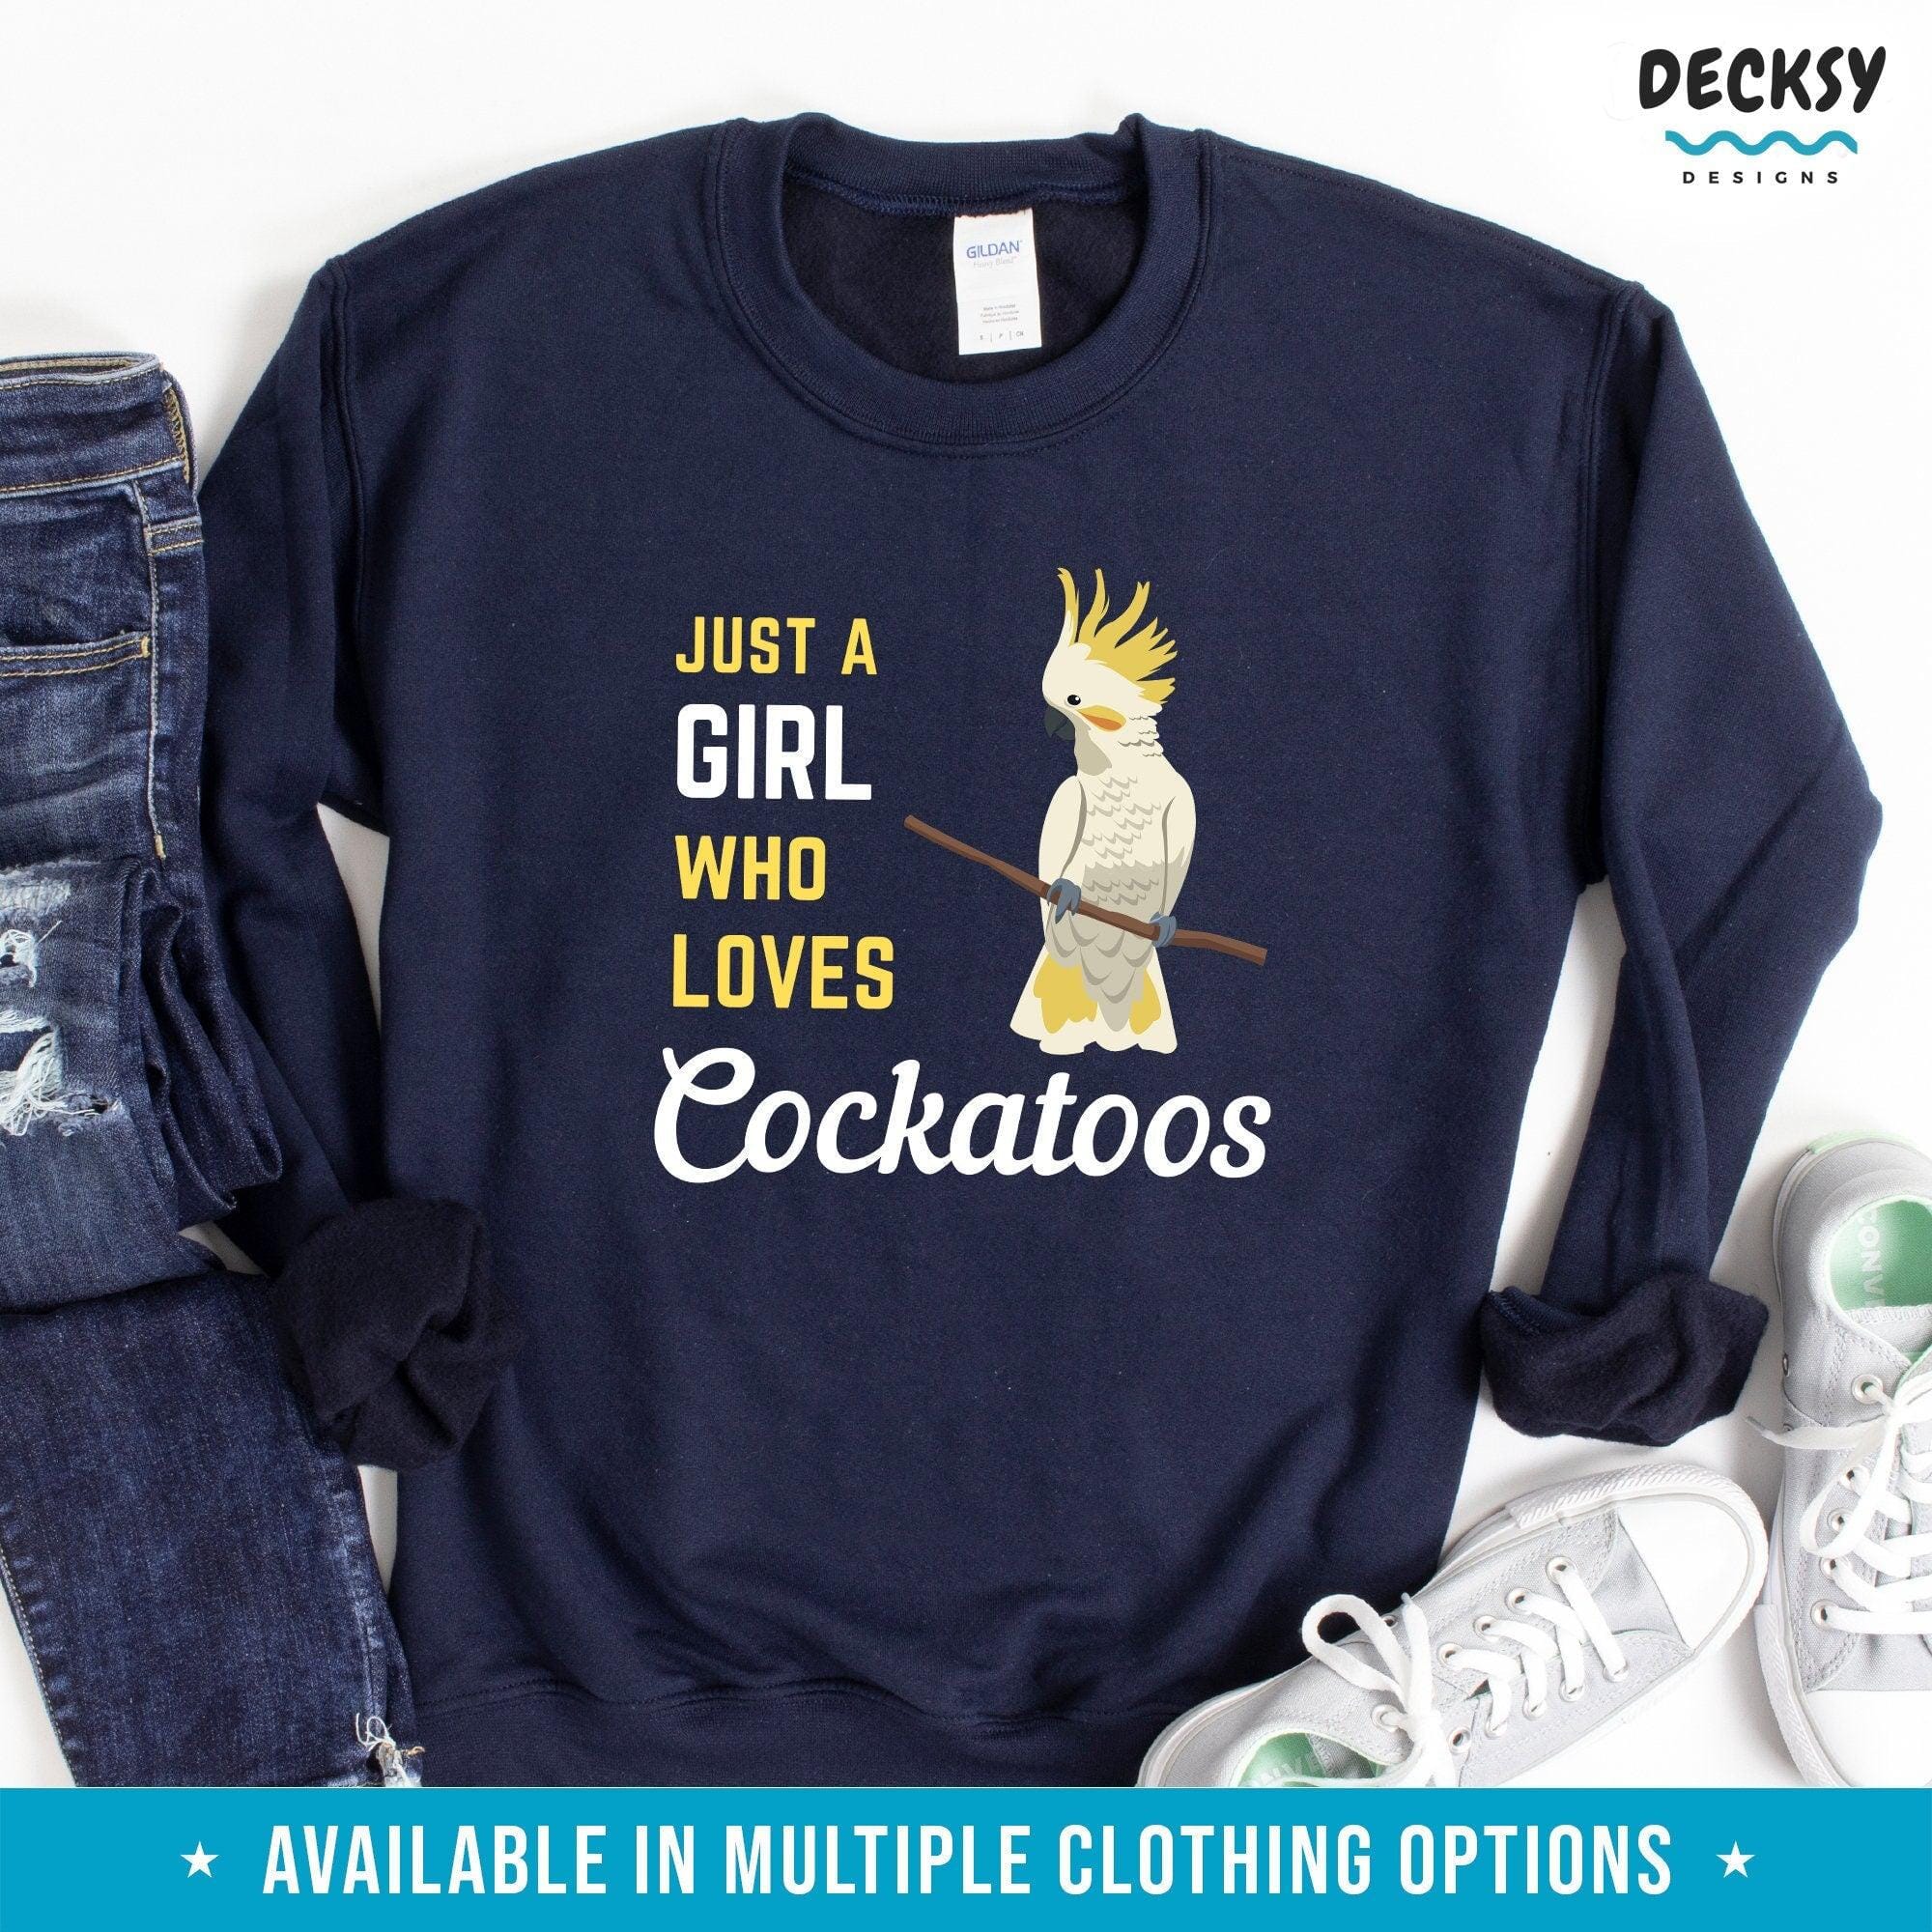 Cockatoo Shirt, Gift For Bird Lovers, Parrot Lover Gifts, Cockatoo Owner Sweatshirt Hoodie-Clothing:Gender-Neutral Adult Clothing:Tops & Tees:T-shirts:Graphic Tees-DecksyDesigns